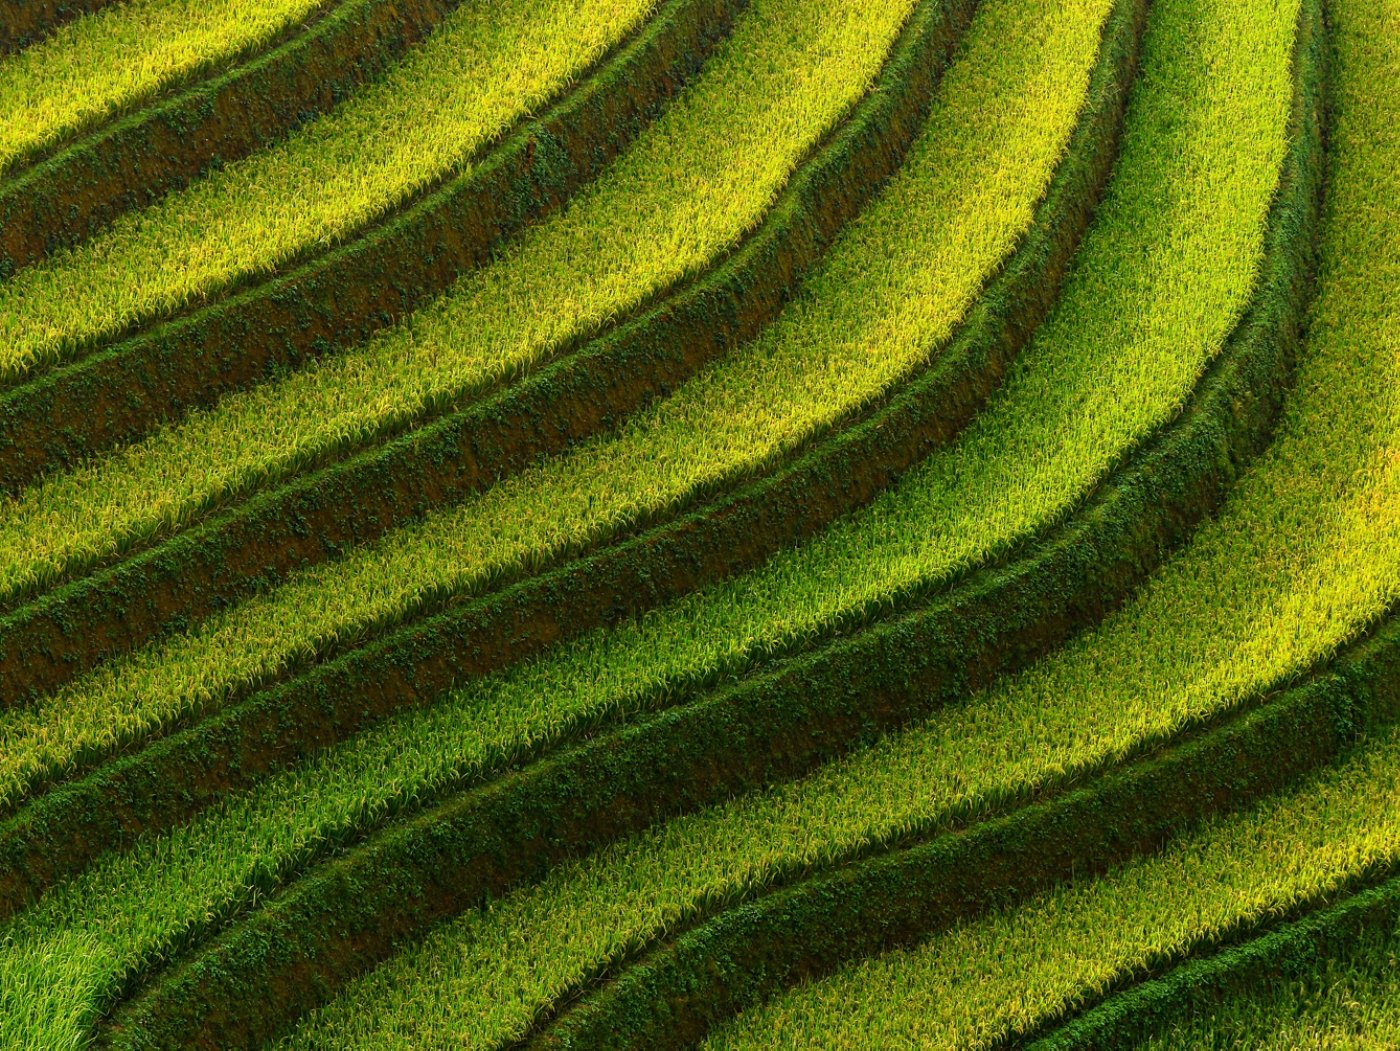 Mu Cang Chai is located in the Northern part of Vietnam at 1000 meters above the sea level. Its terraced rice fields hold the most magnificent beauty that the world has to offer. It is one of the few most beautiful and picturesque places on earth.